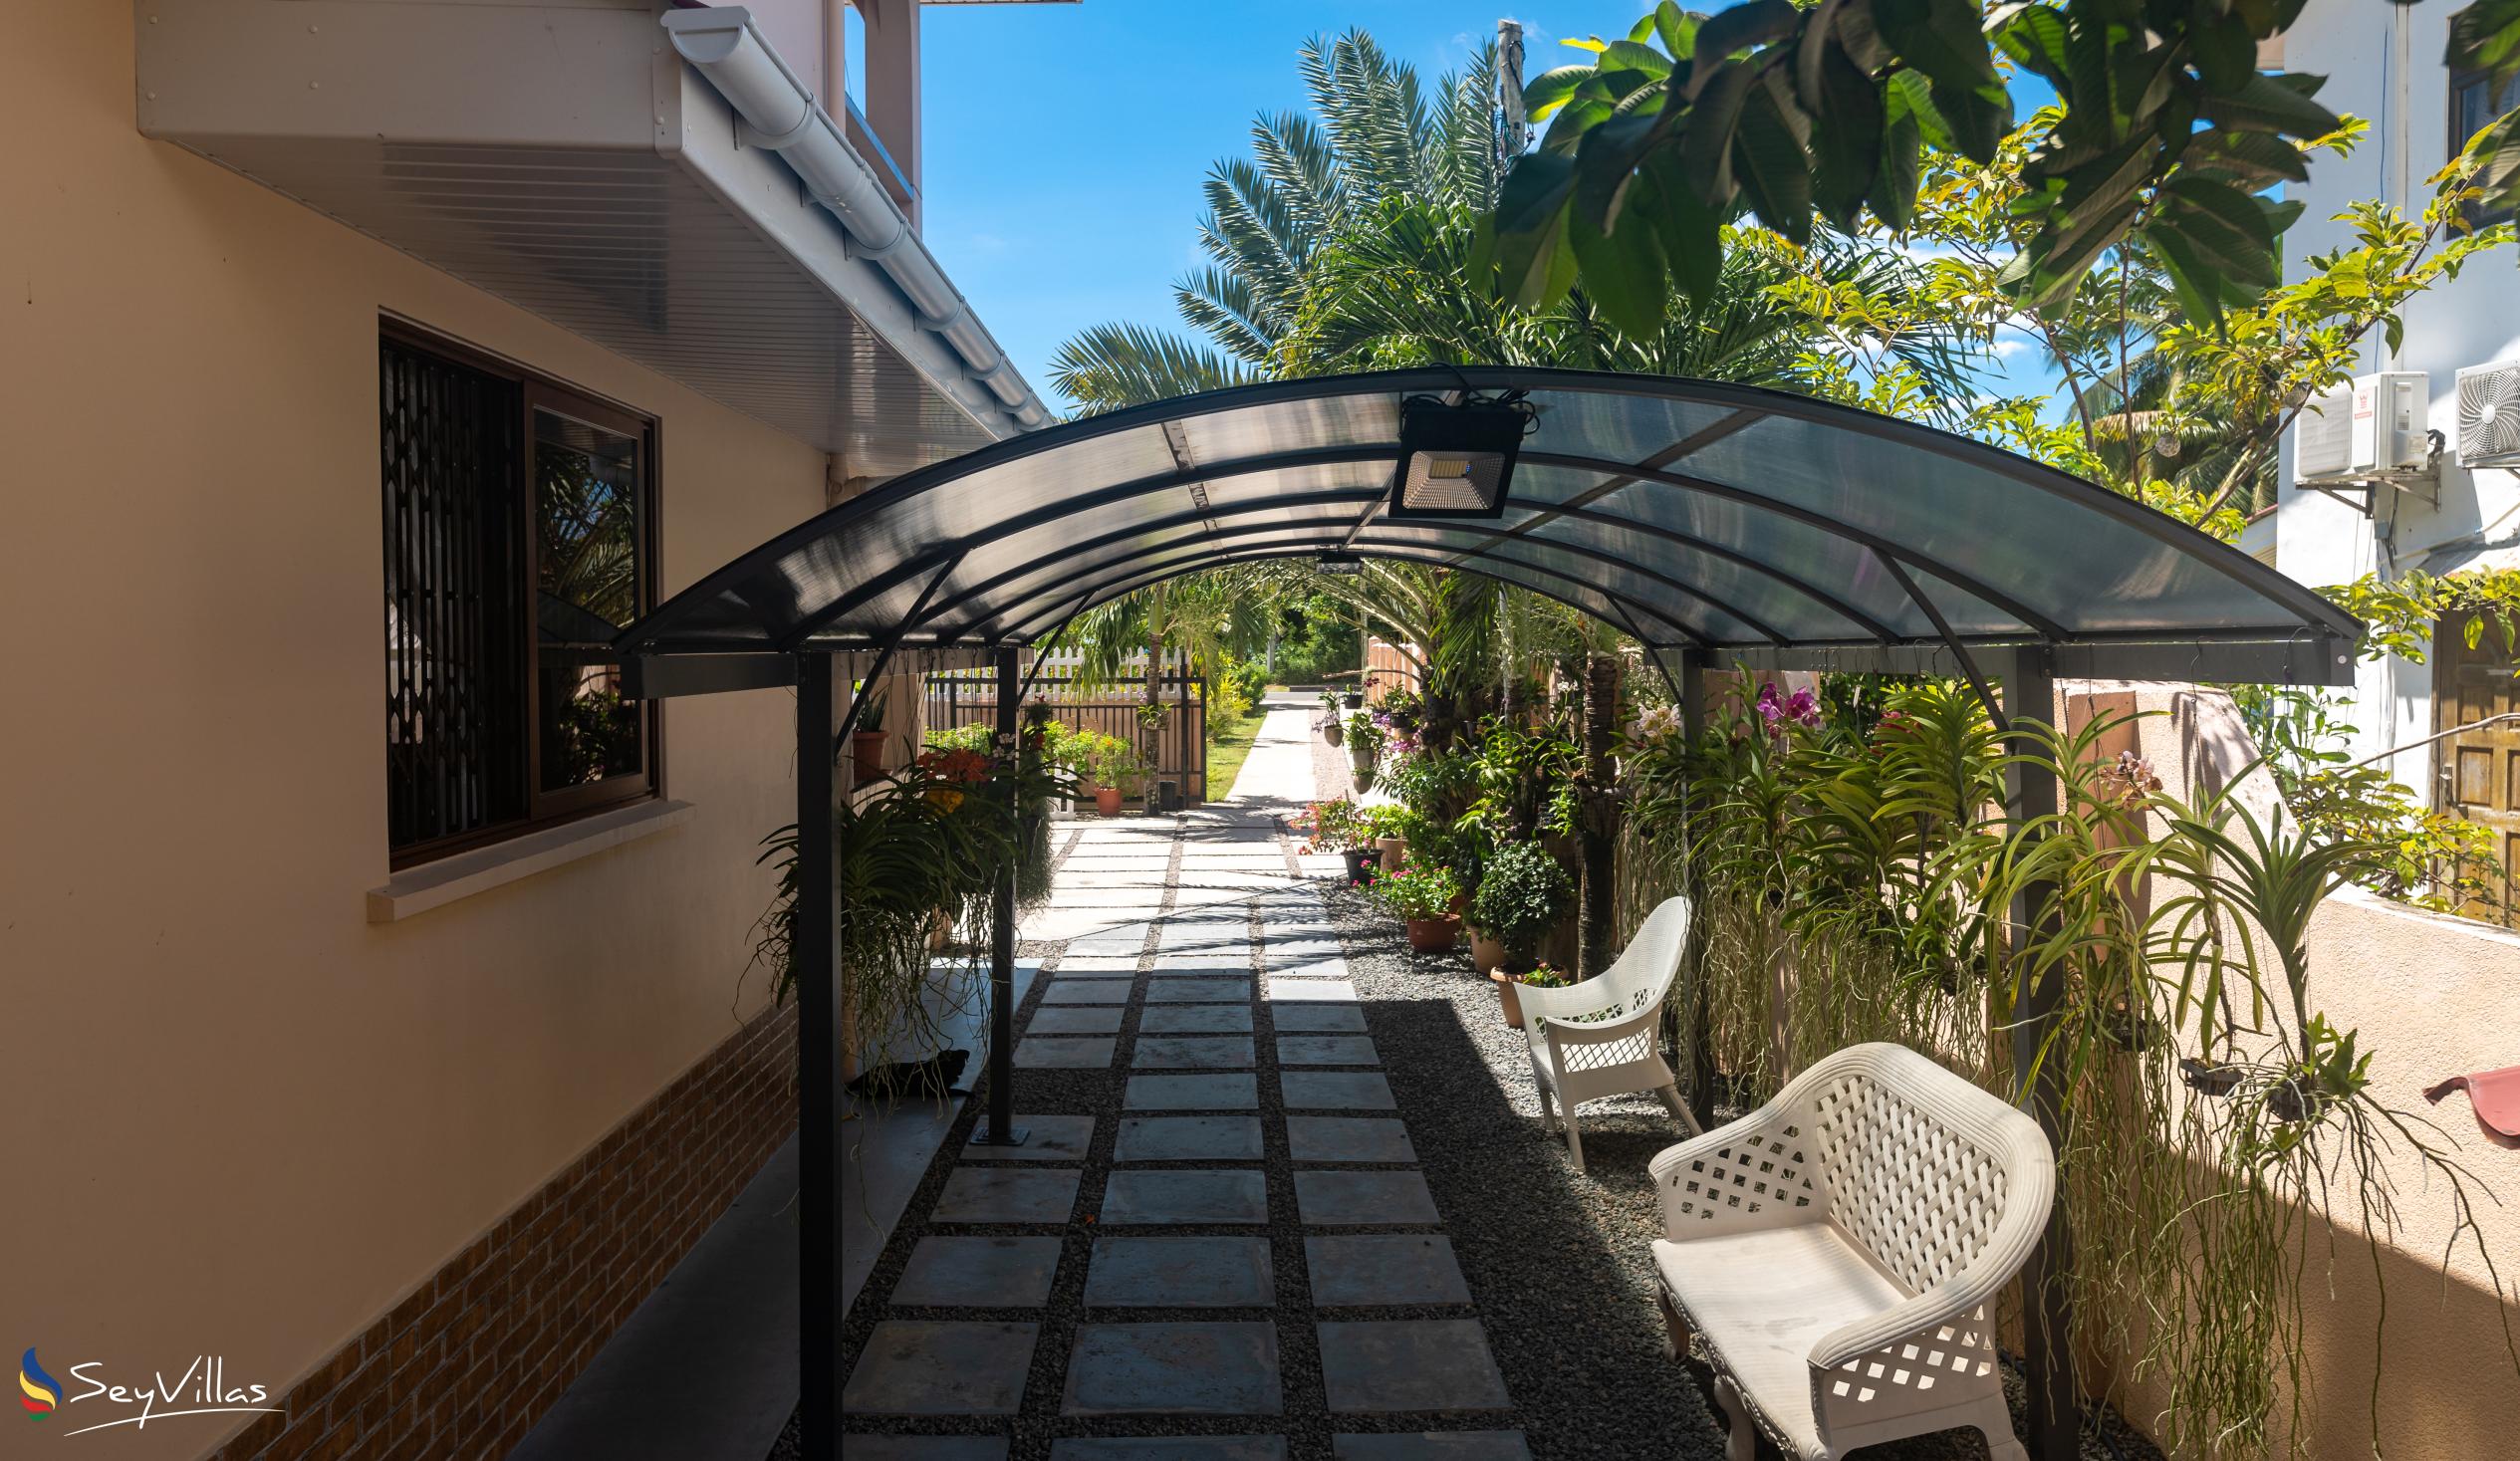 Photo 6: Erica's Residence Self Catering Apartment - Outdoor area - Mahé (Seychelles)